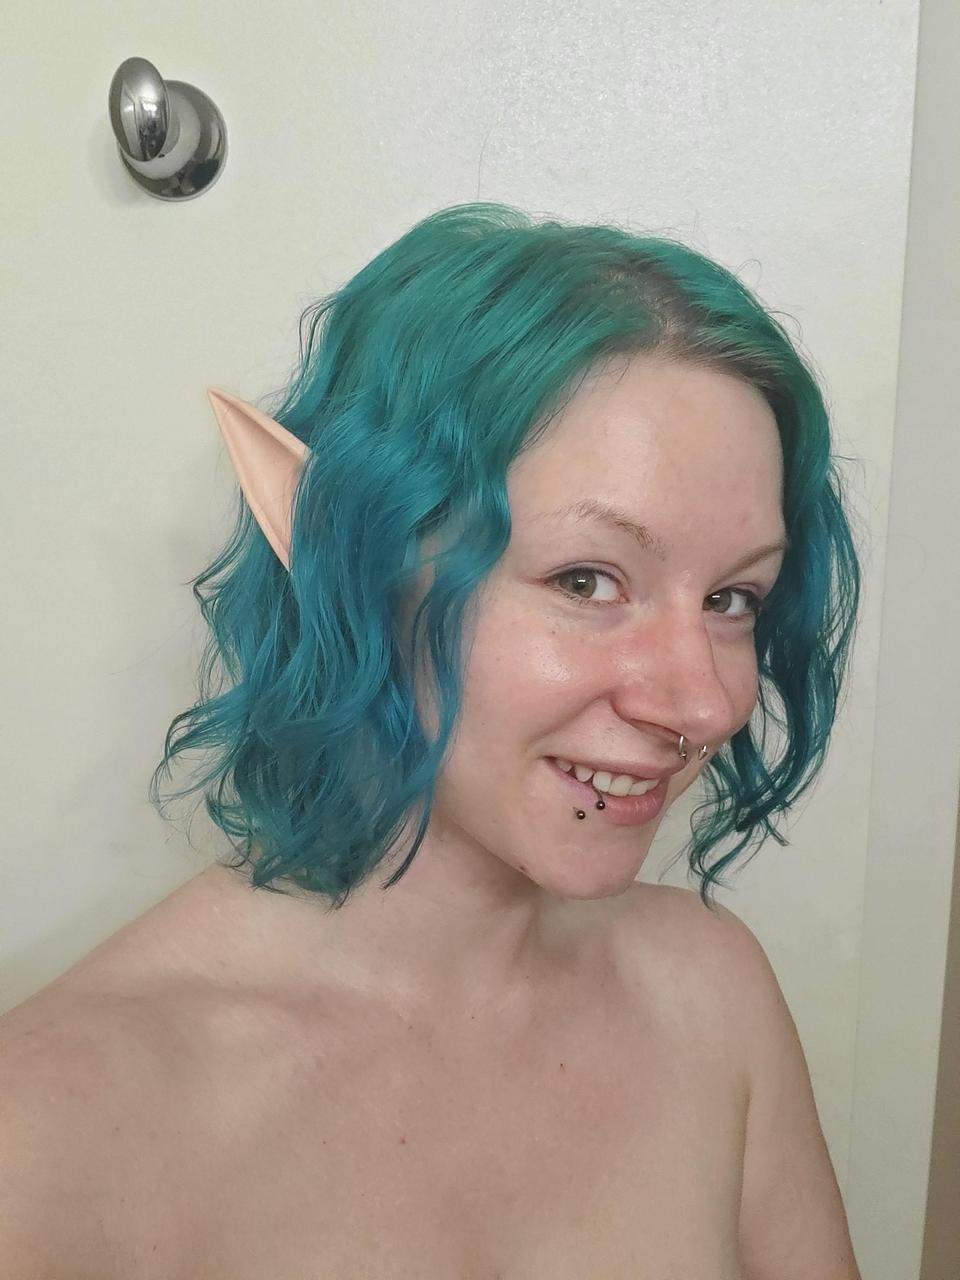 My Elf Ears Came In The Mai